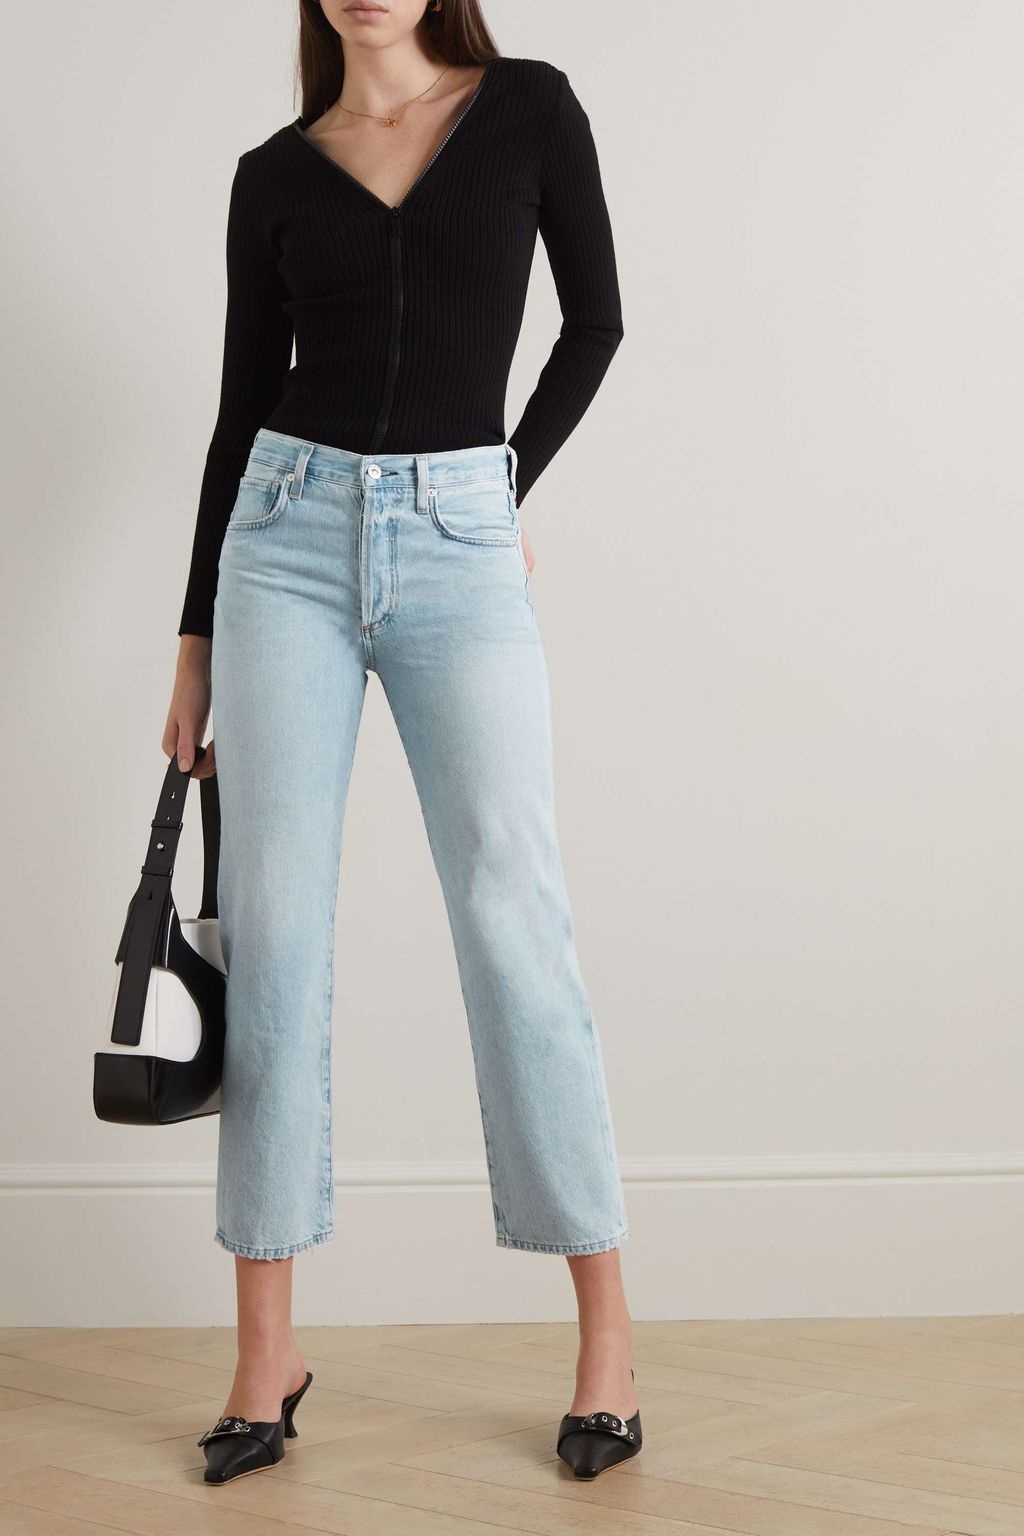 These Are the 21 Most Flattering Jeans—You're Welcome | Who What Wear